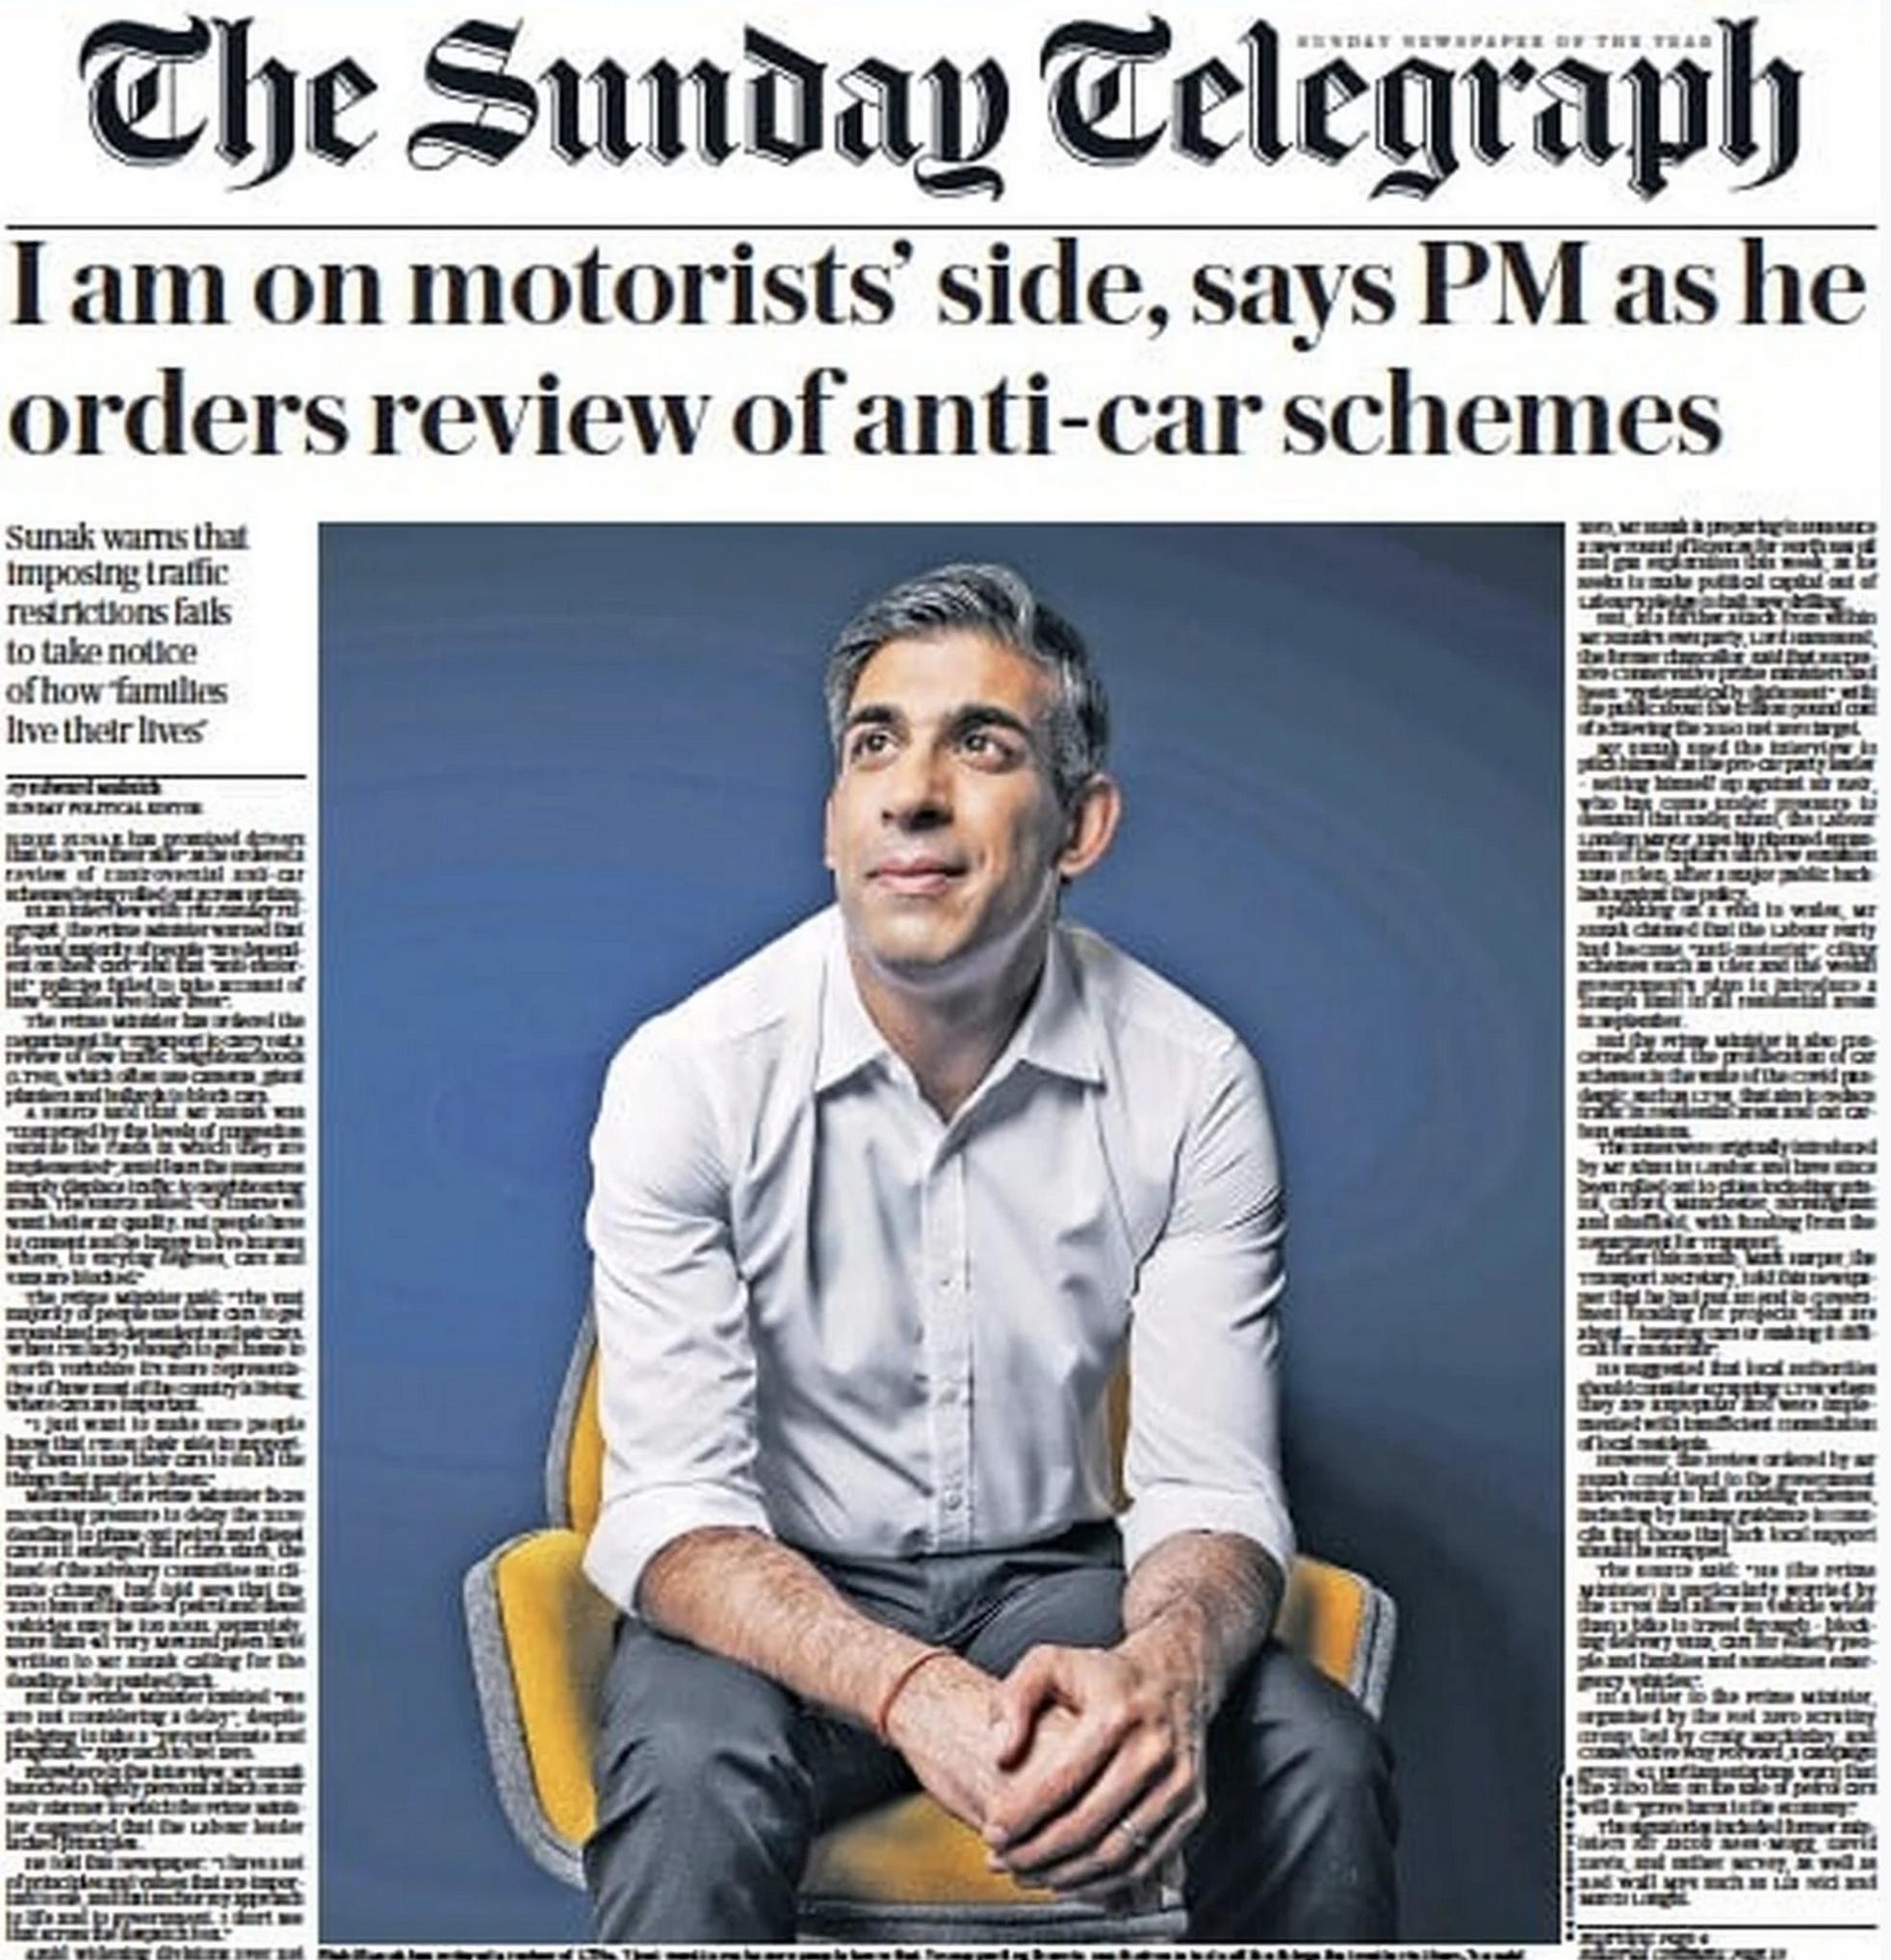 The Sunday Telegraph gave the PM a front page platform